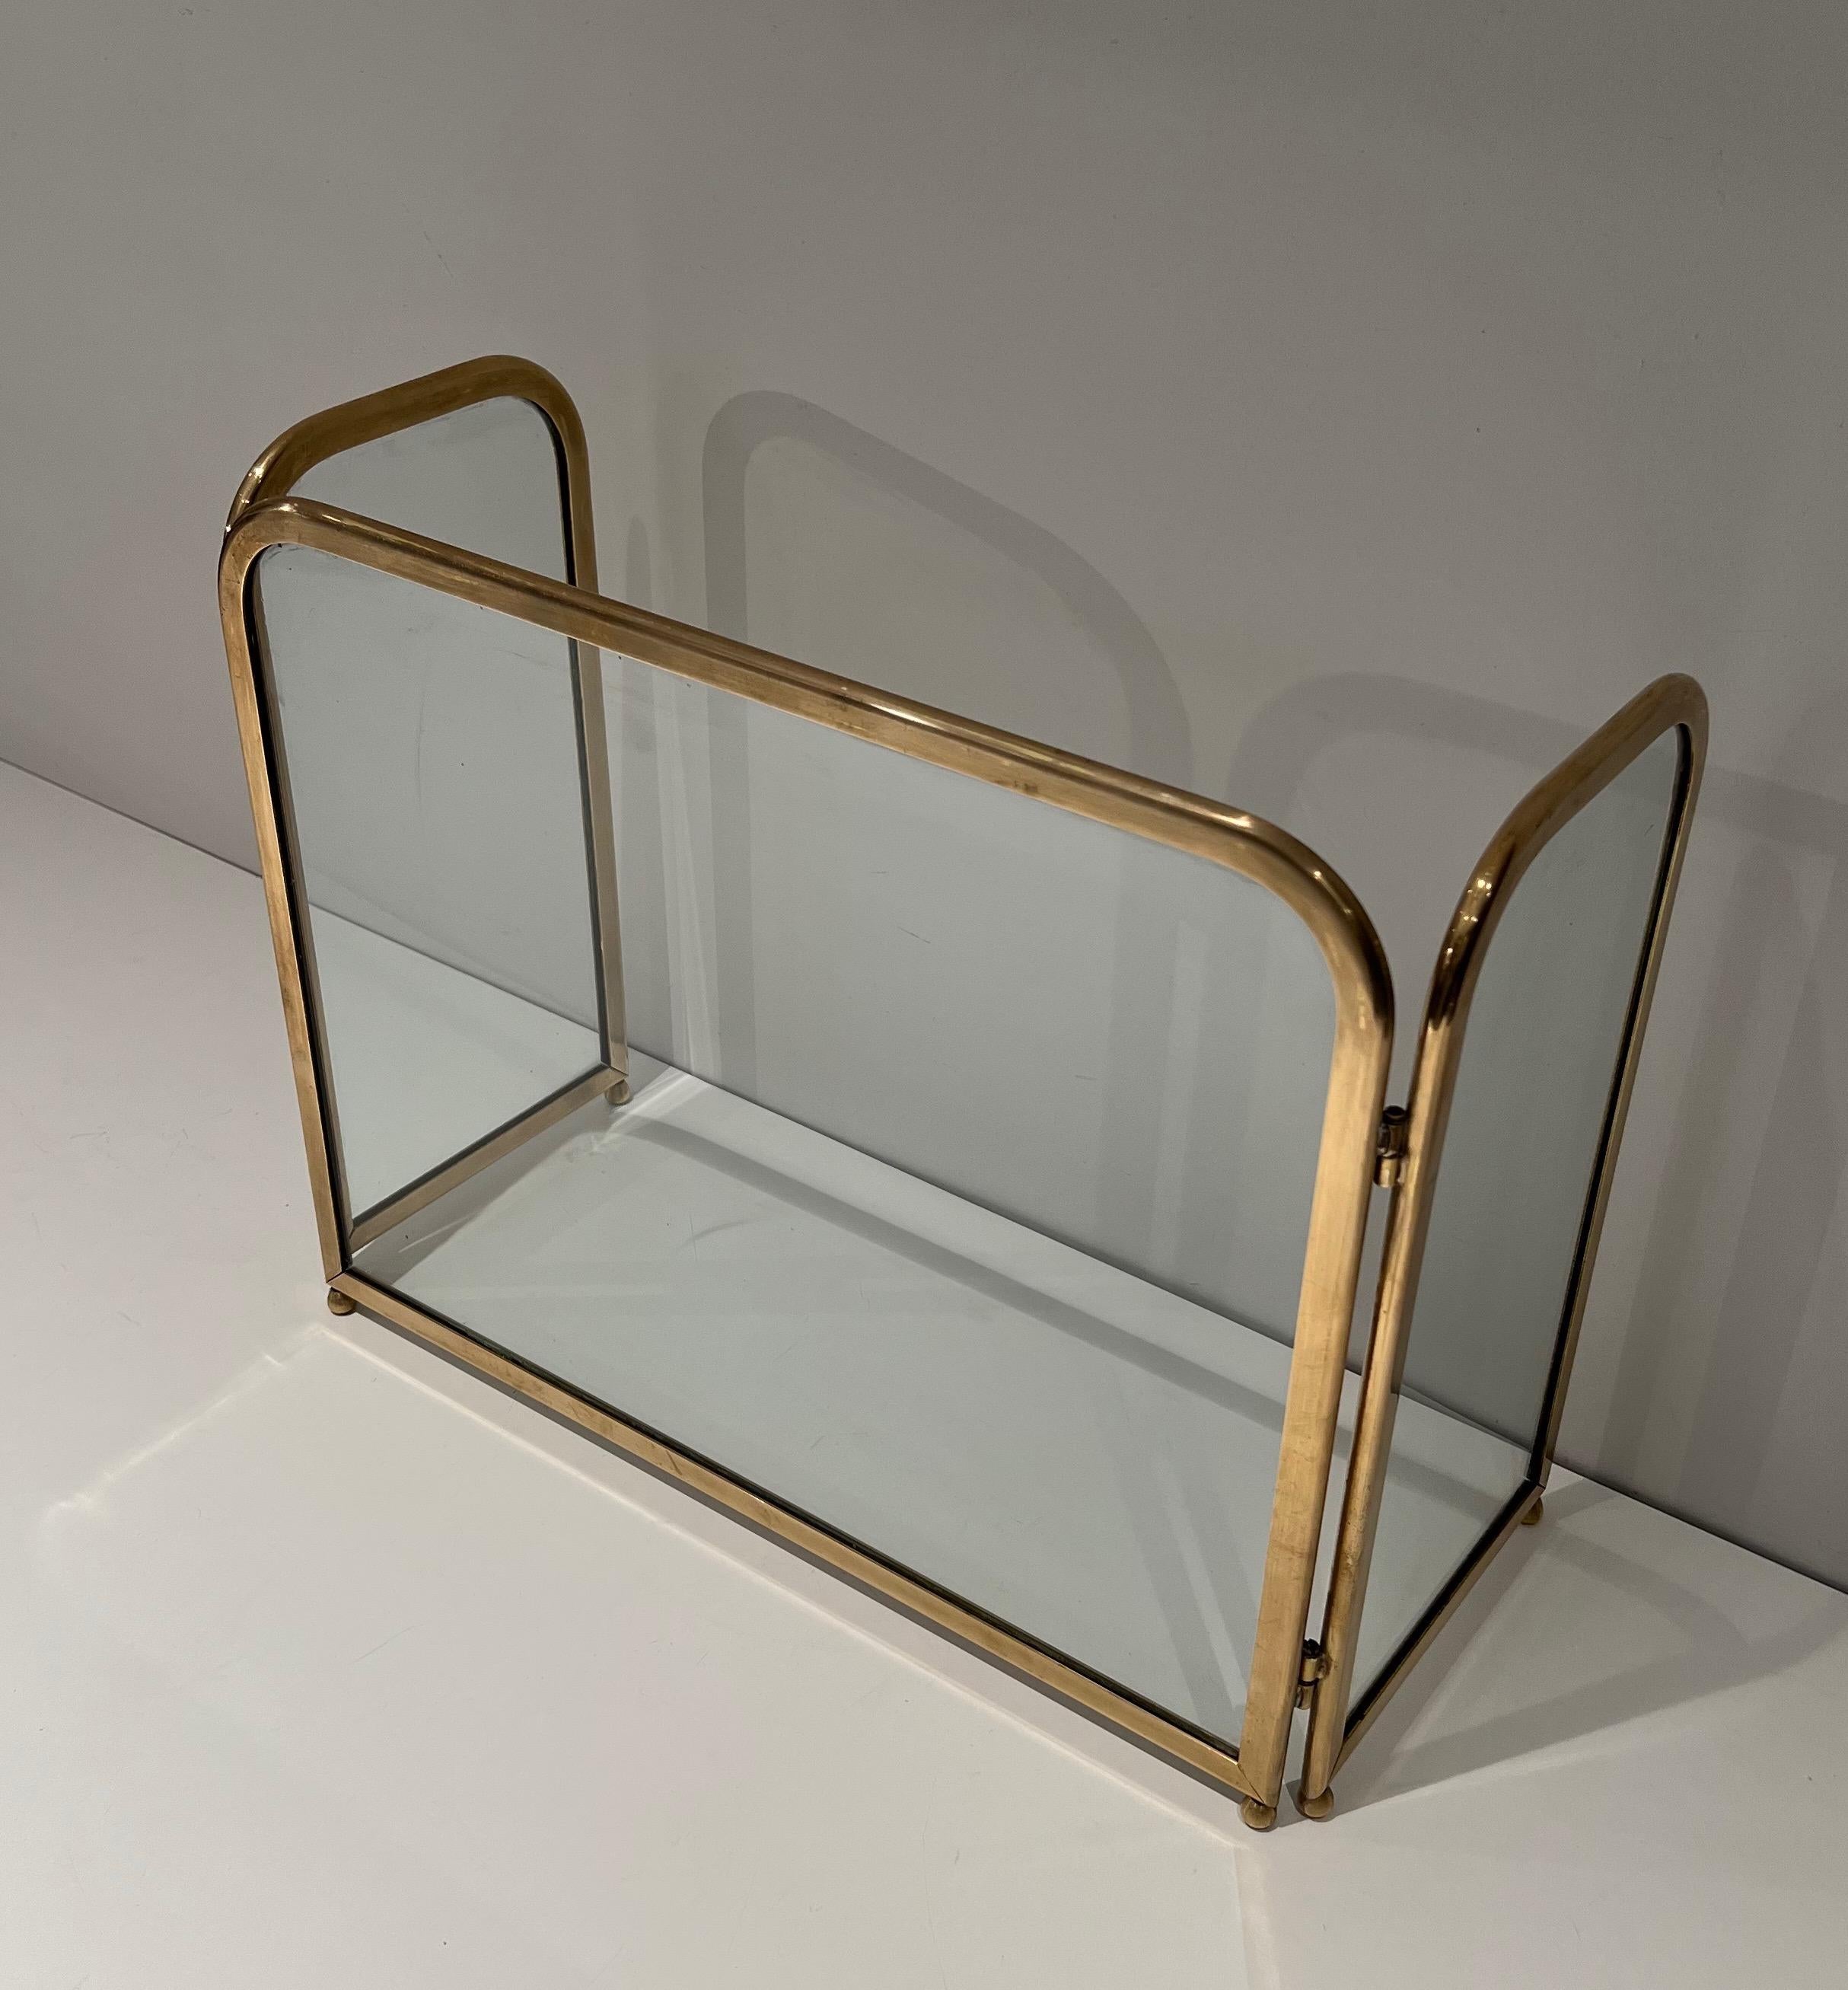 Late 20th Century 3 Glass Panels Fireplace Screen in a Brass Frame